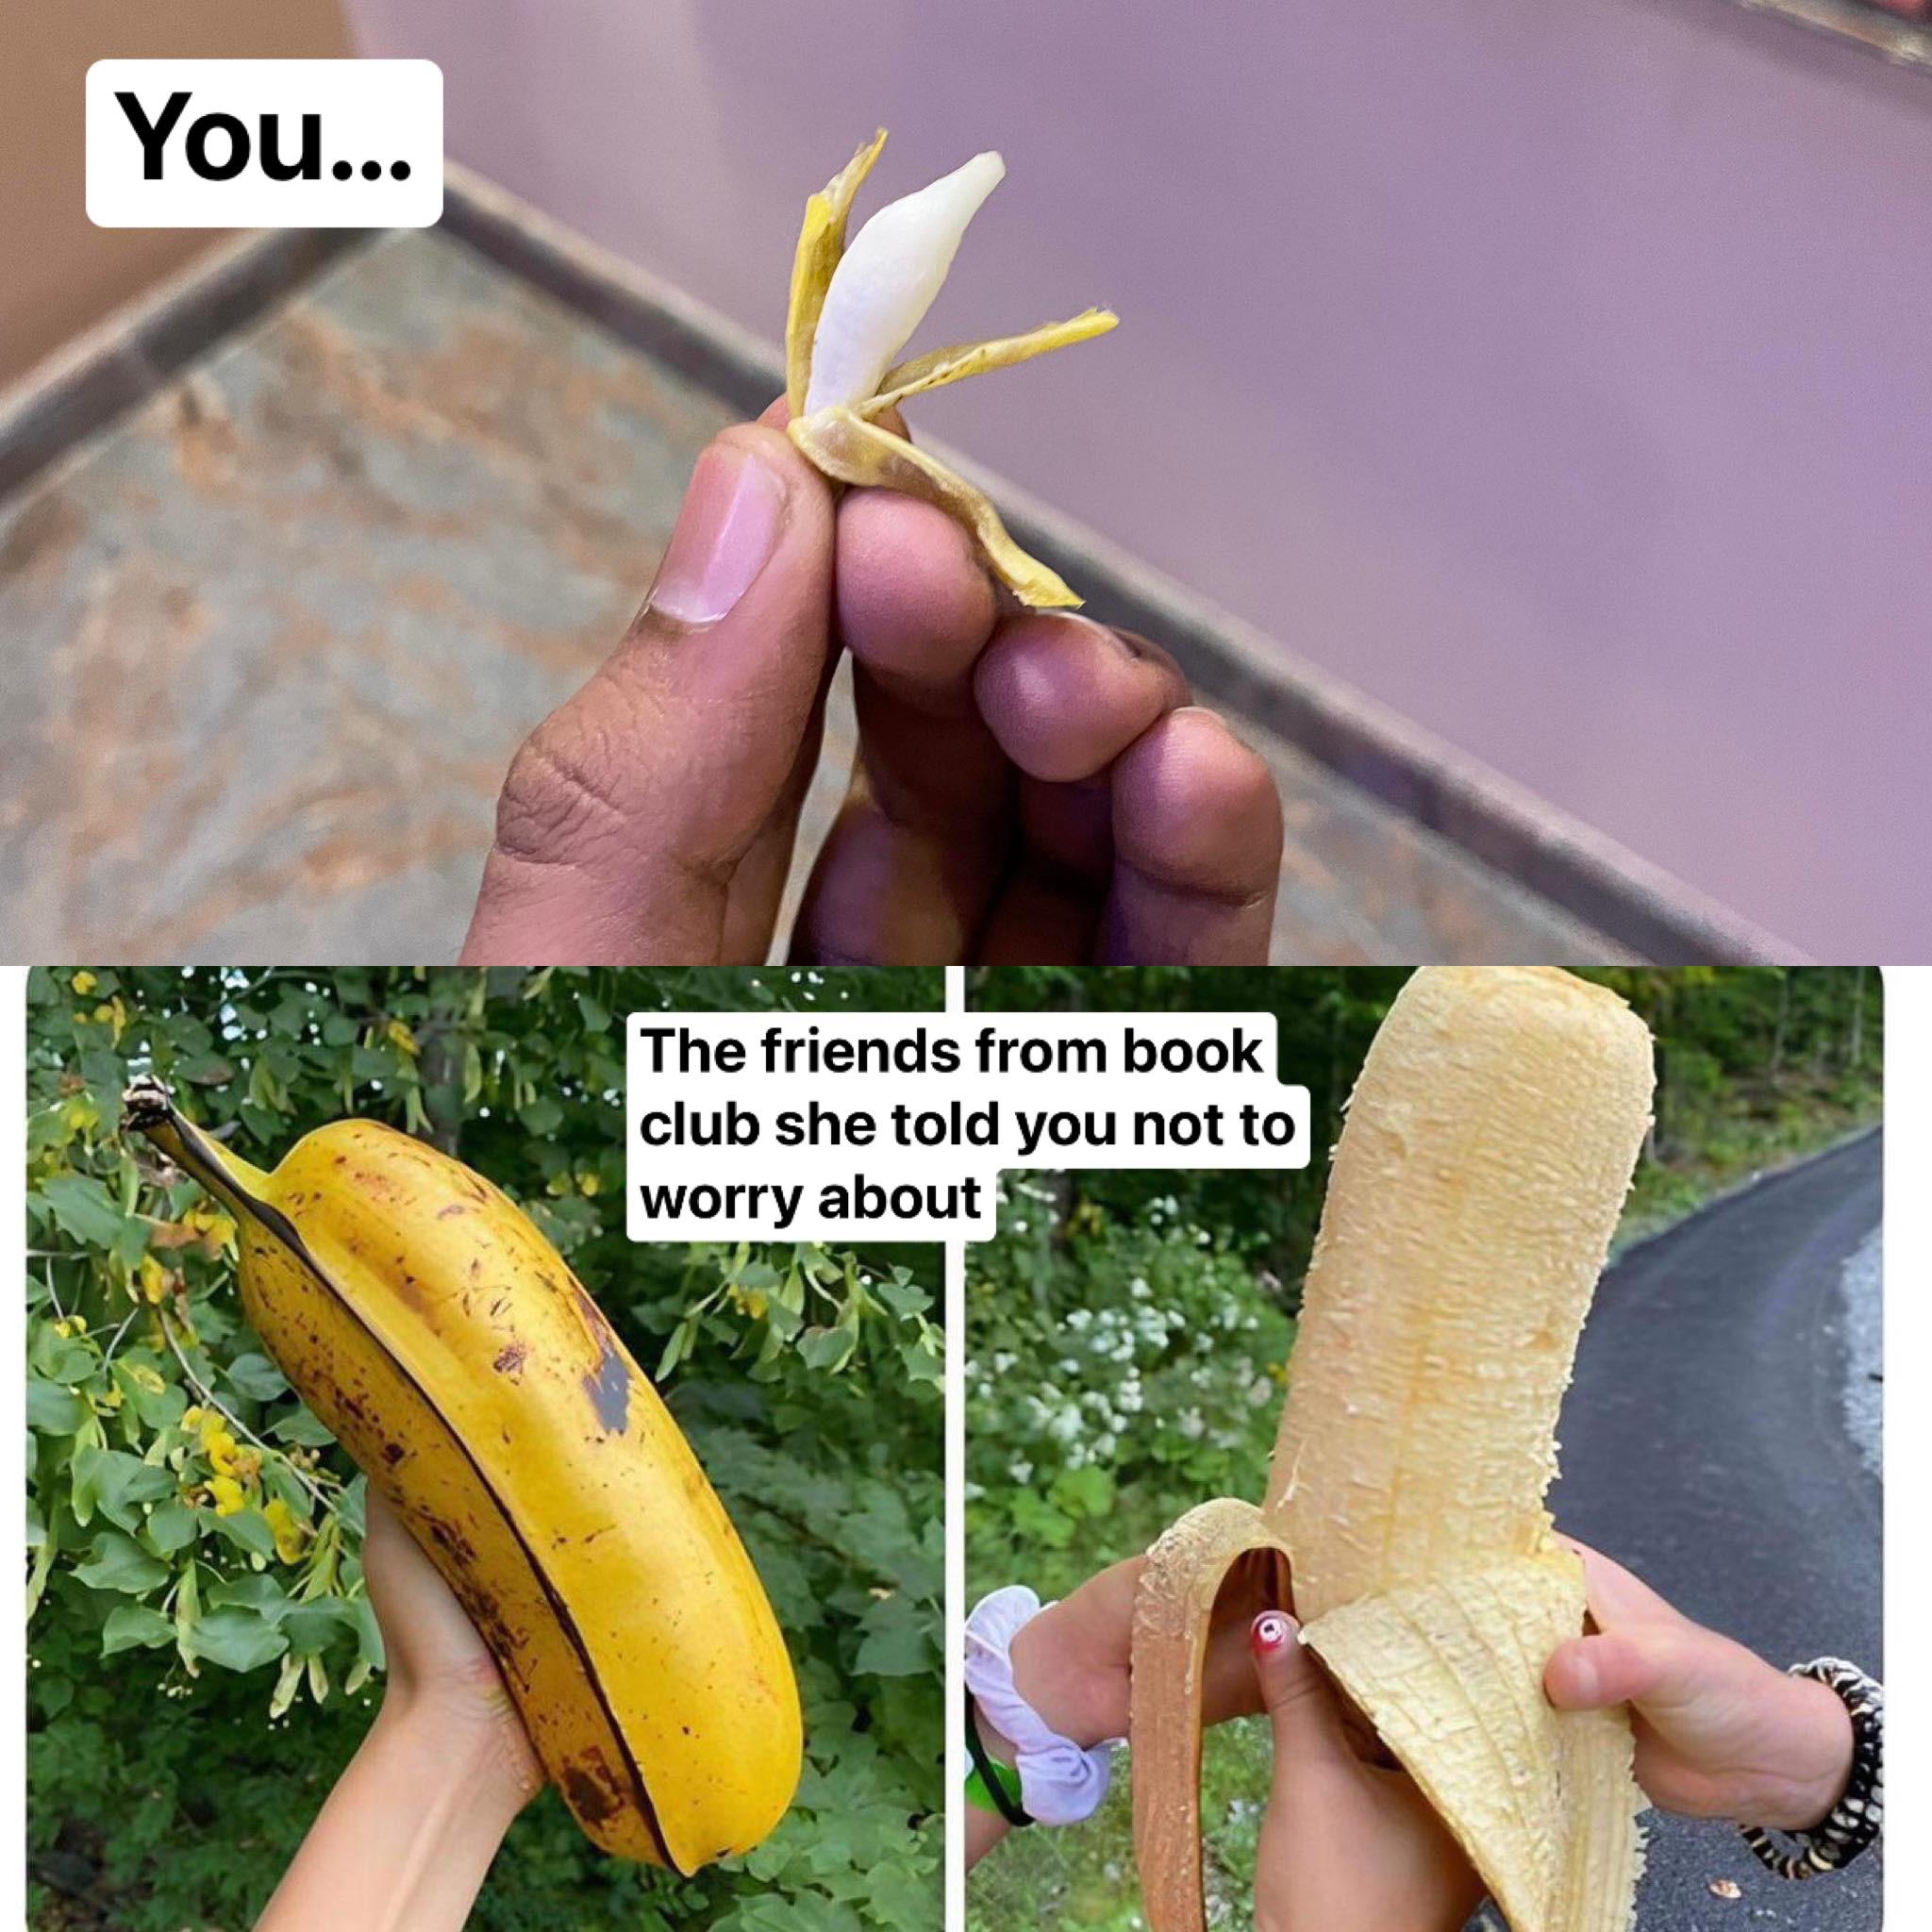 funny memes - massive banana - You... The friends from book club she told you not to worry about